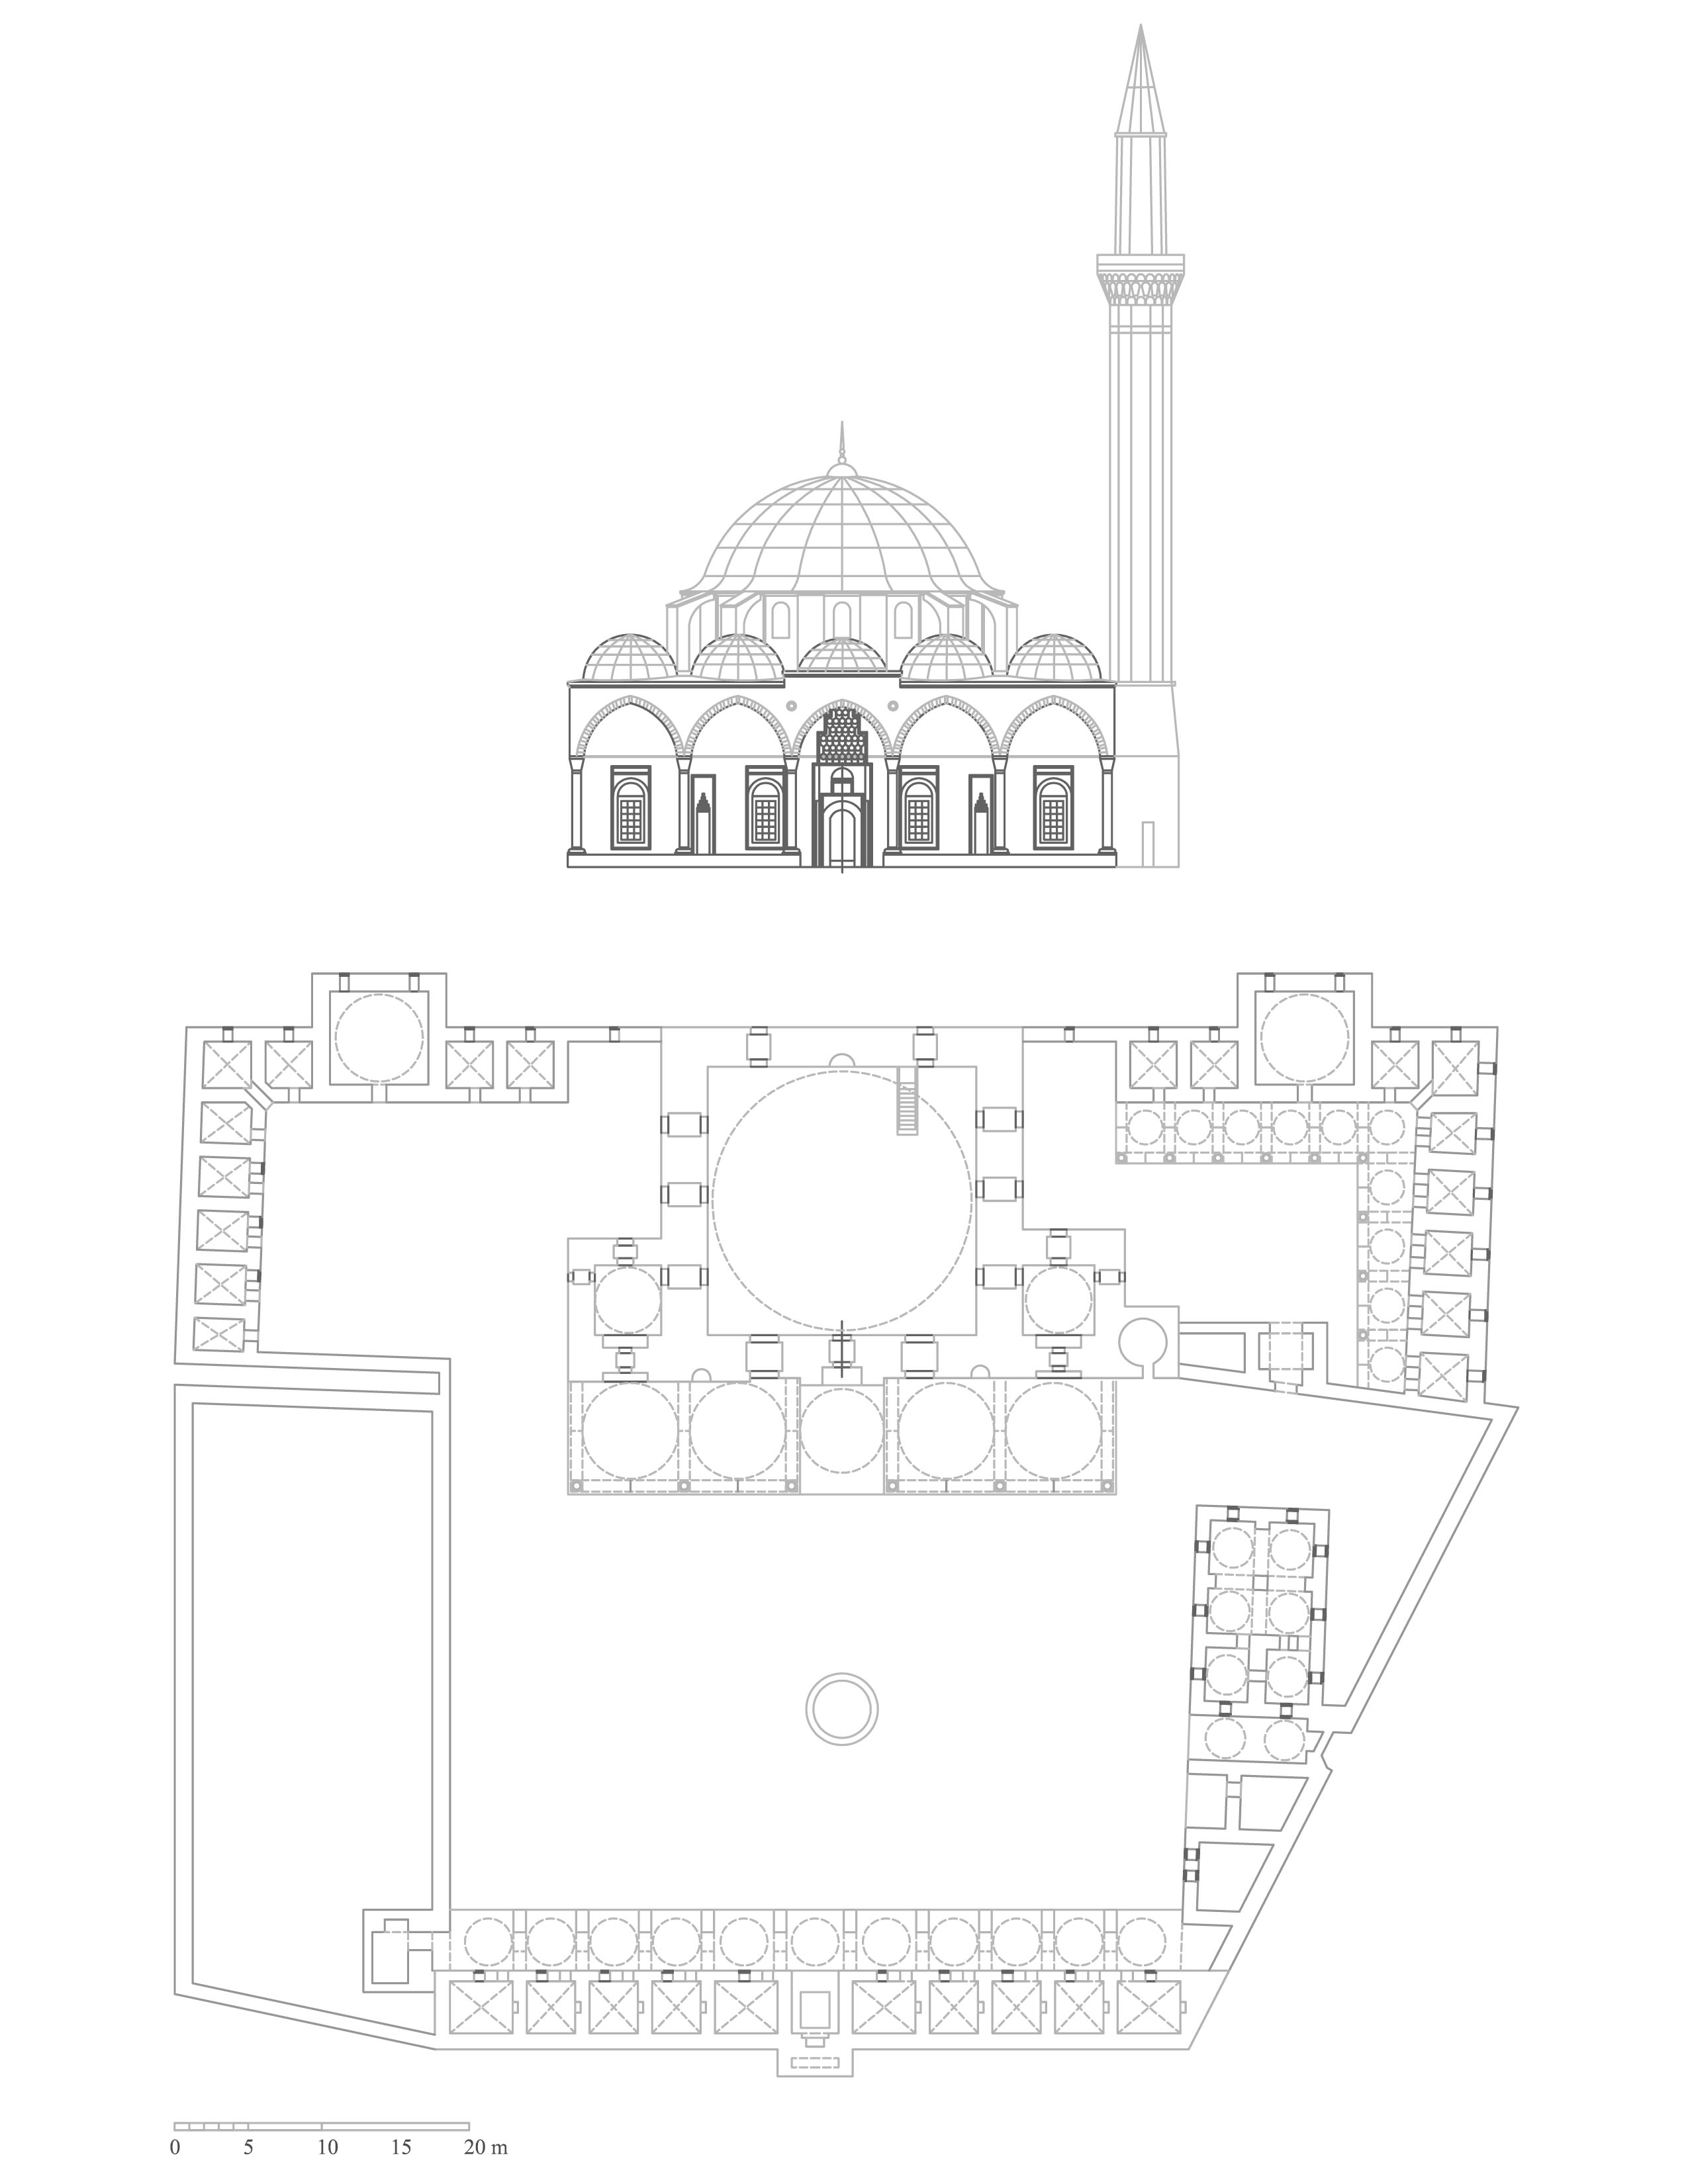 Jami' wa-Madrasa al-Khusruwiyya - Reconstruction plan of the complex and mosque elevation. DWG file in AutoCAD 2000 format. Click the download button to download a zipped file containing the .dwg file.